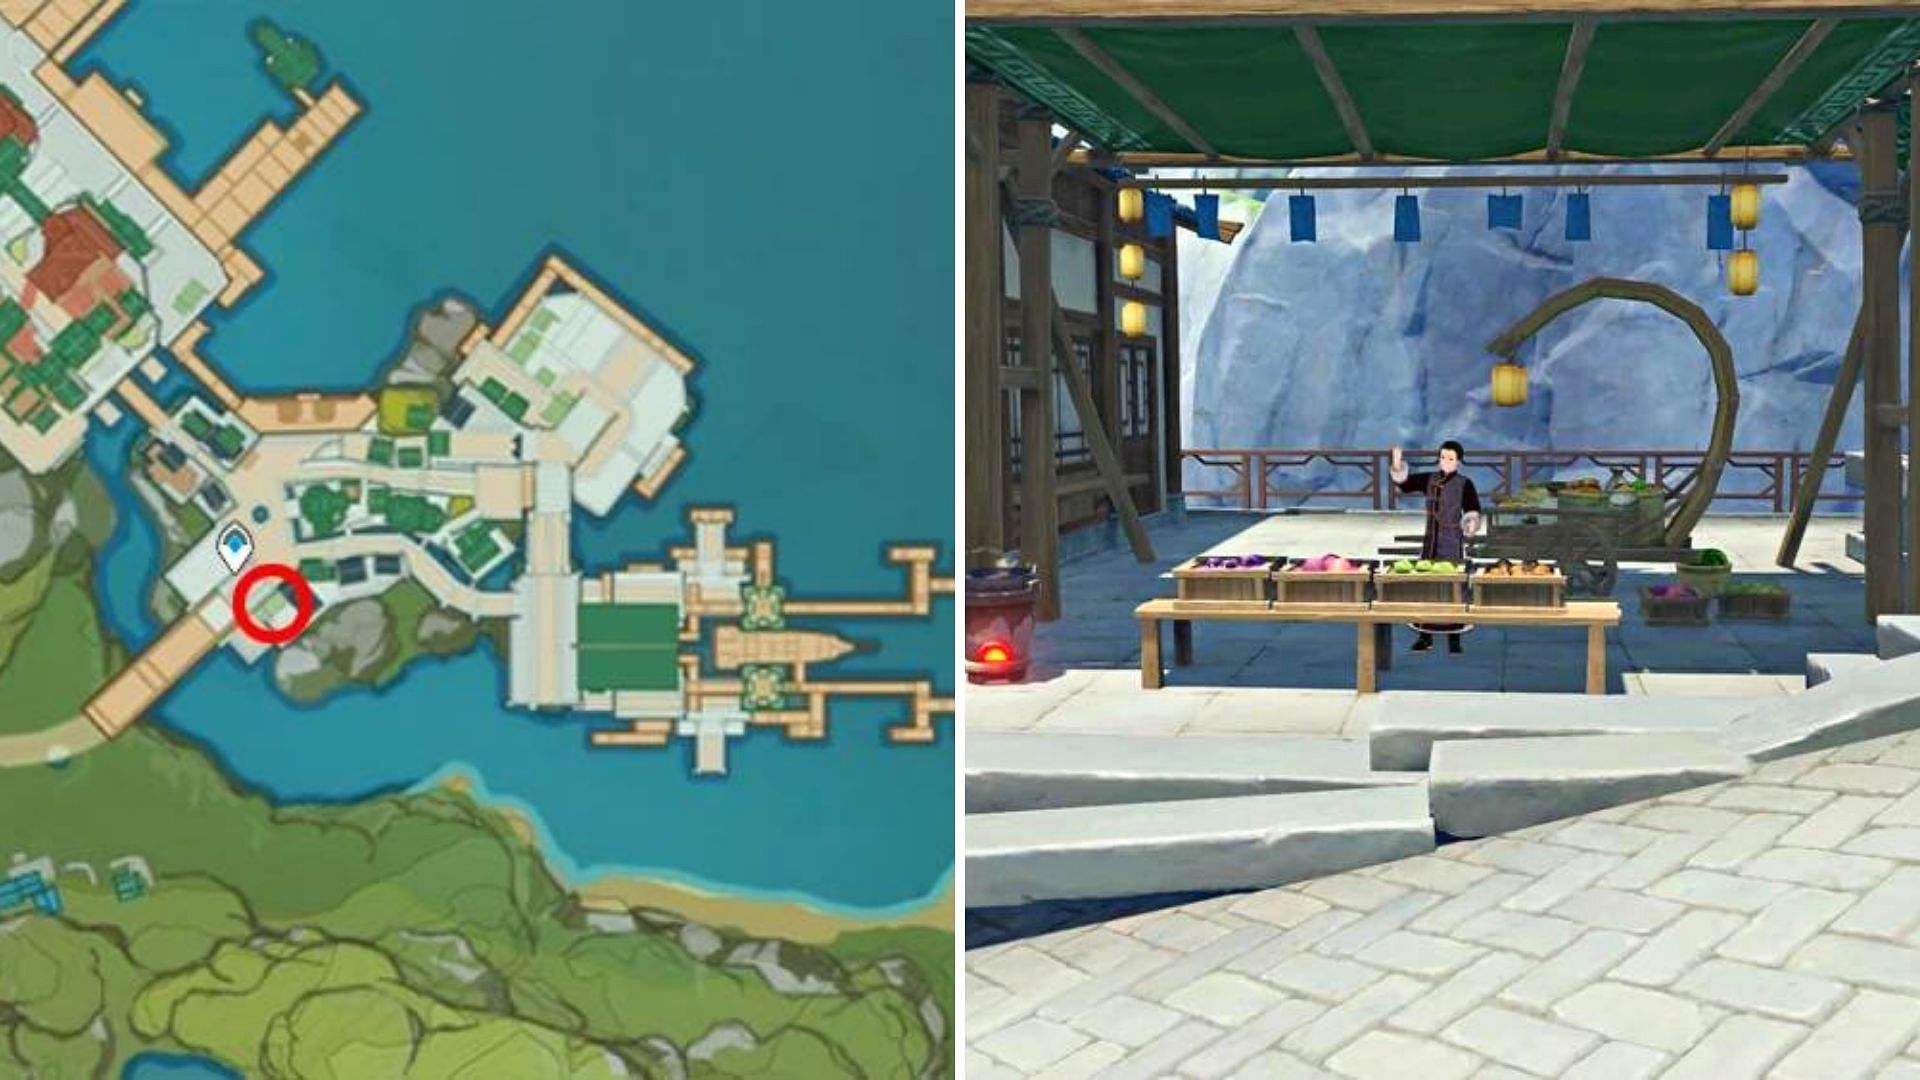 Players can buy pepper at this location in Liyue Harbor (Image via Genshin Impact)